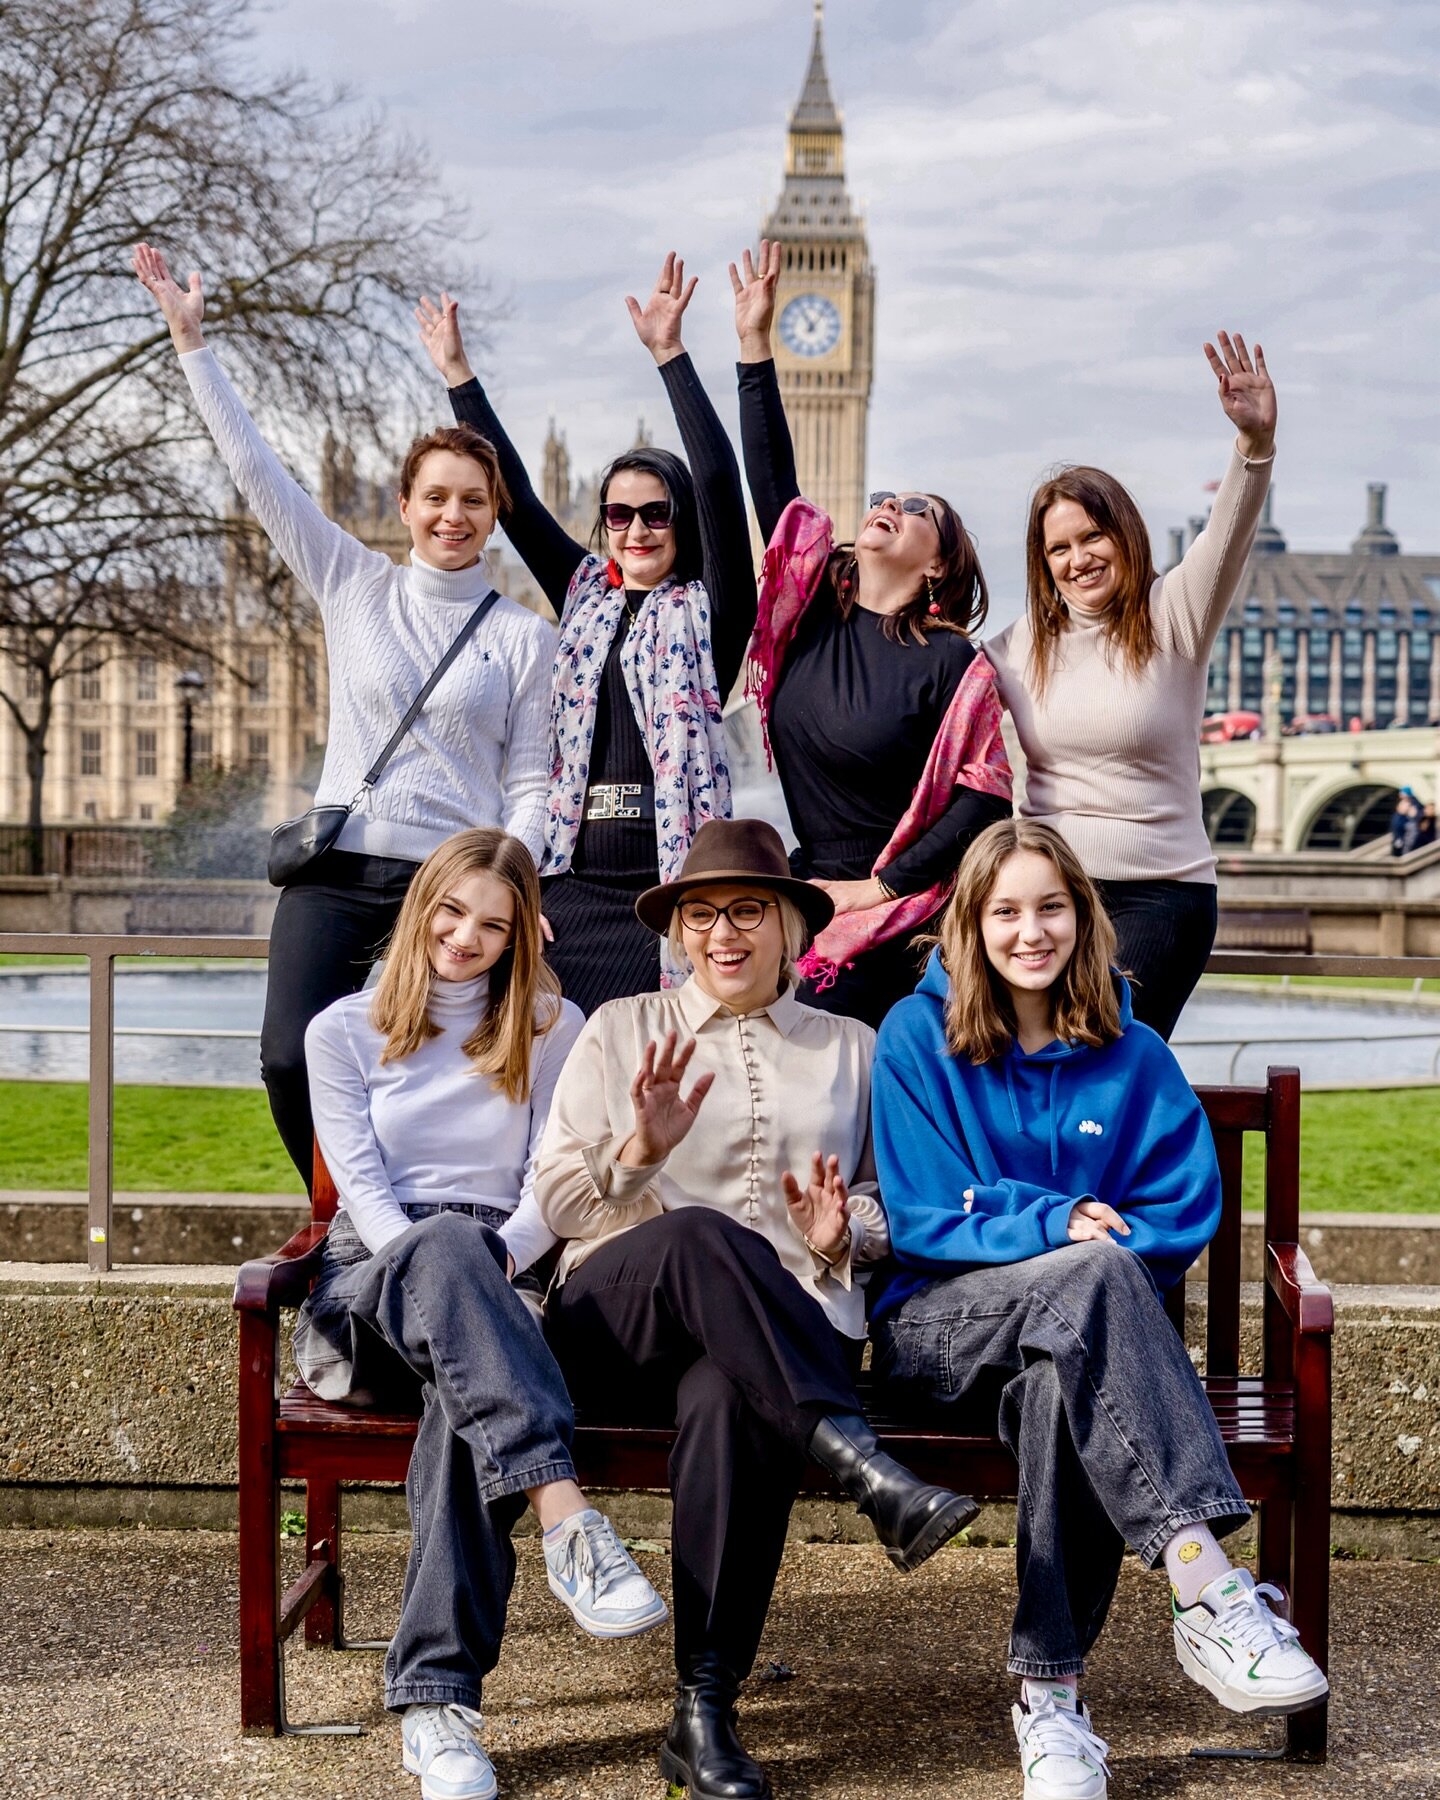 Group photoshoot in London = so much fun with @photowalk_in_london ❤️ 

Book your photoshoot with simple way, using our 24 hours calendar 

1️⃣ visit scalensstudio.com/photoshoot-london
2️⃣ choose package that suit you the best 
3️⃣ choose date &amp;